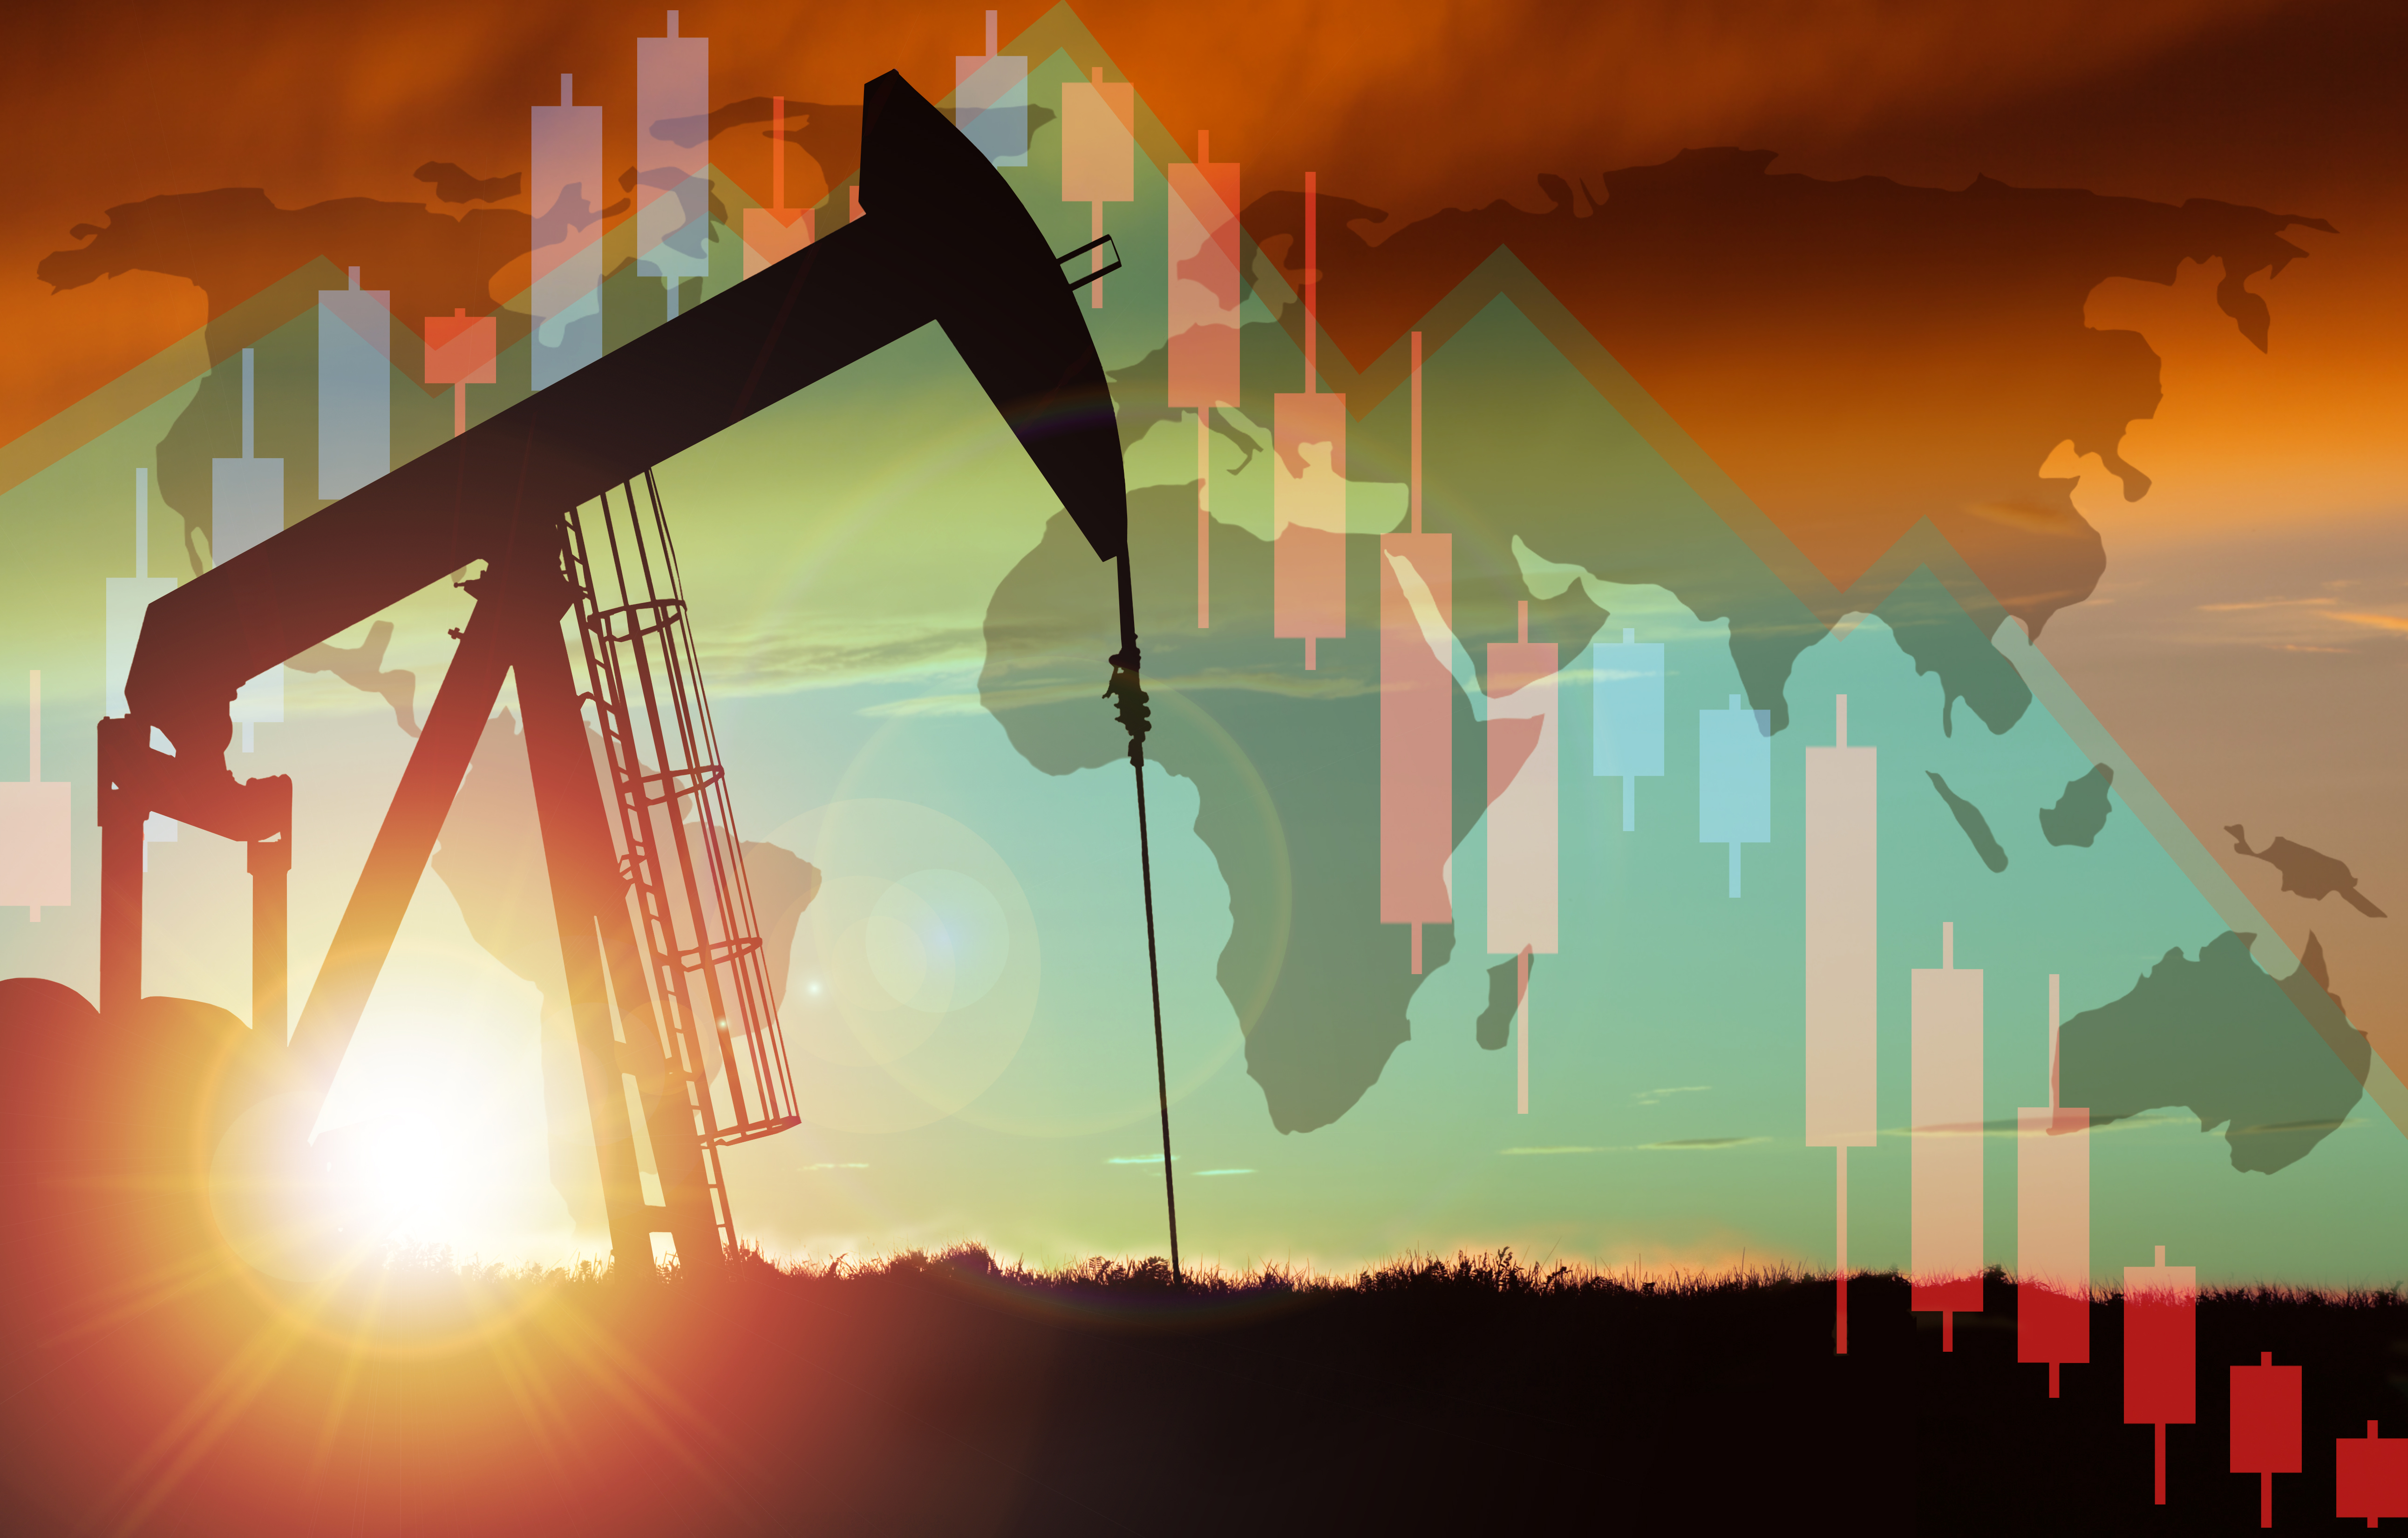 3D rendering of pump jack silhouette against a sunset sky with world map and declining stock chart background.